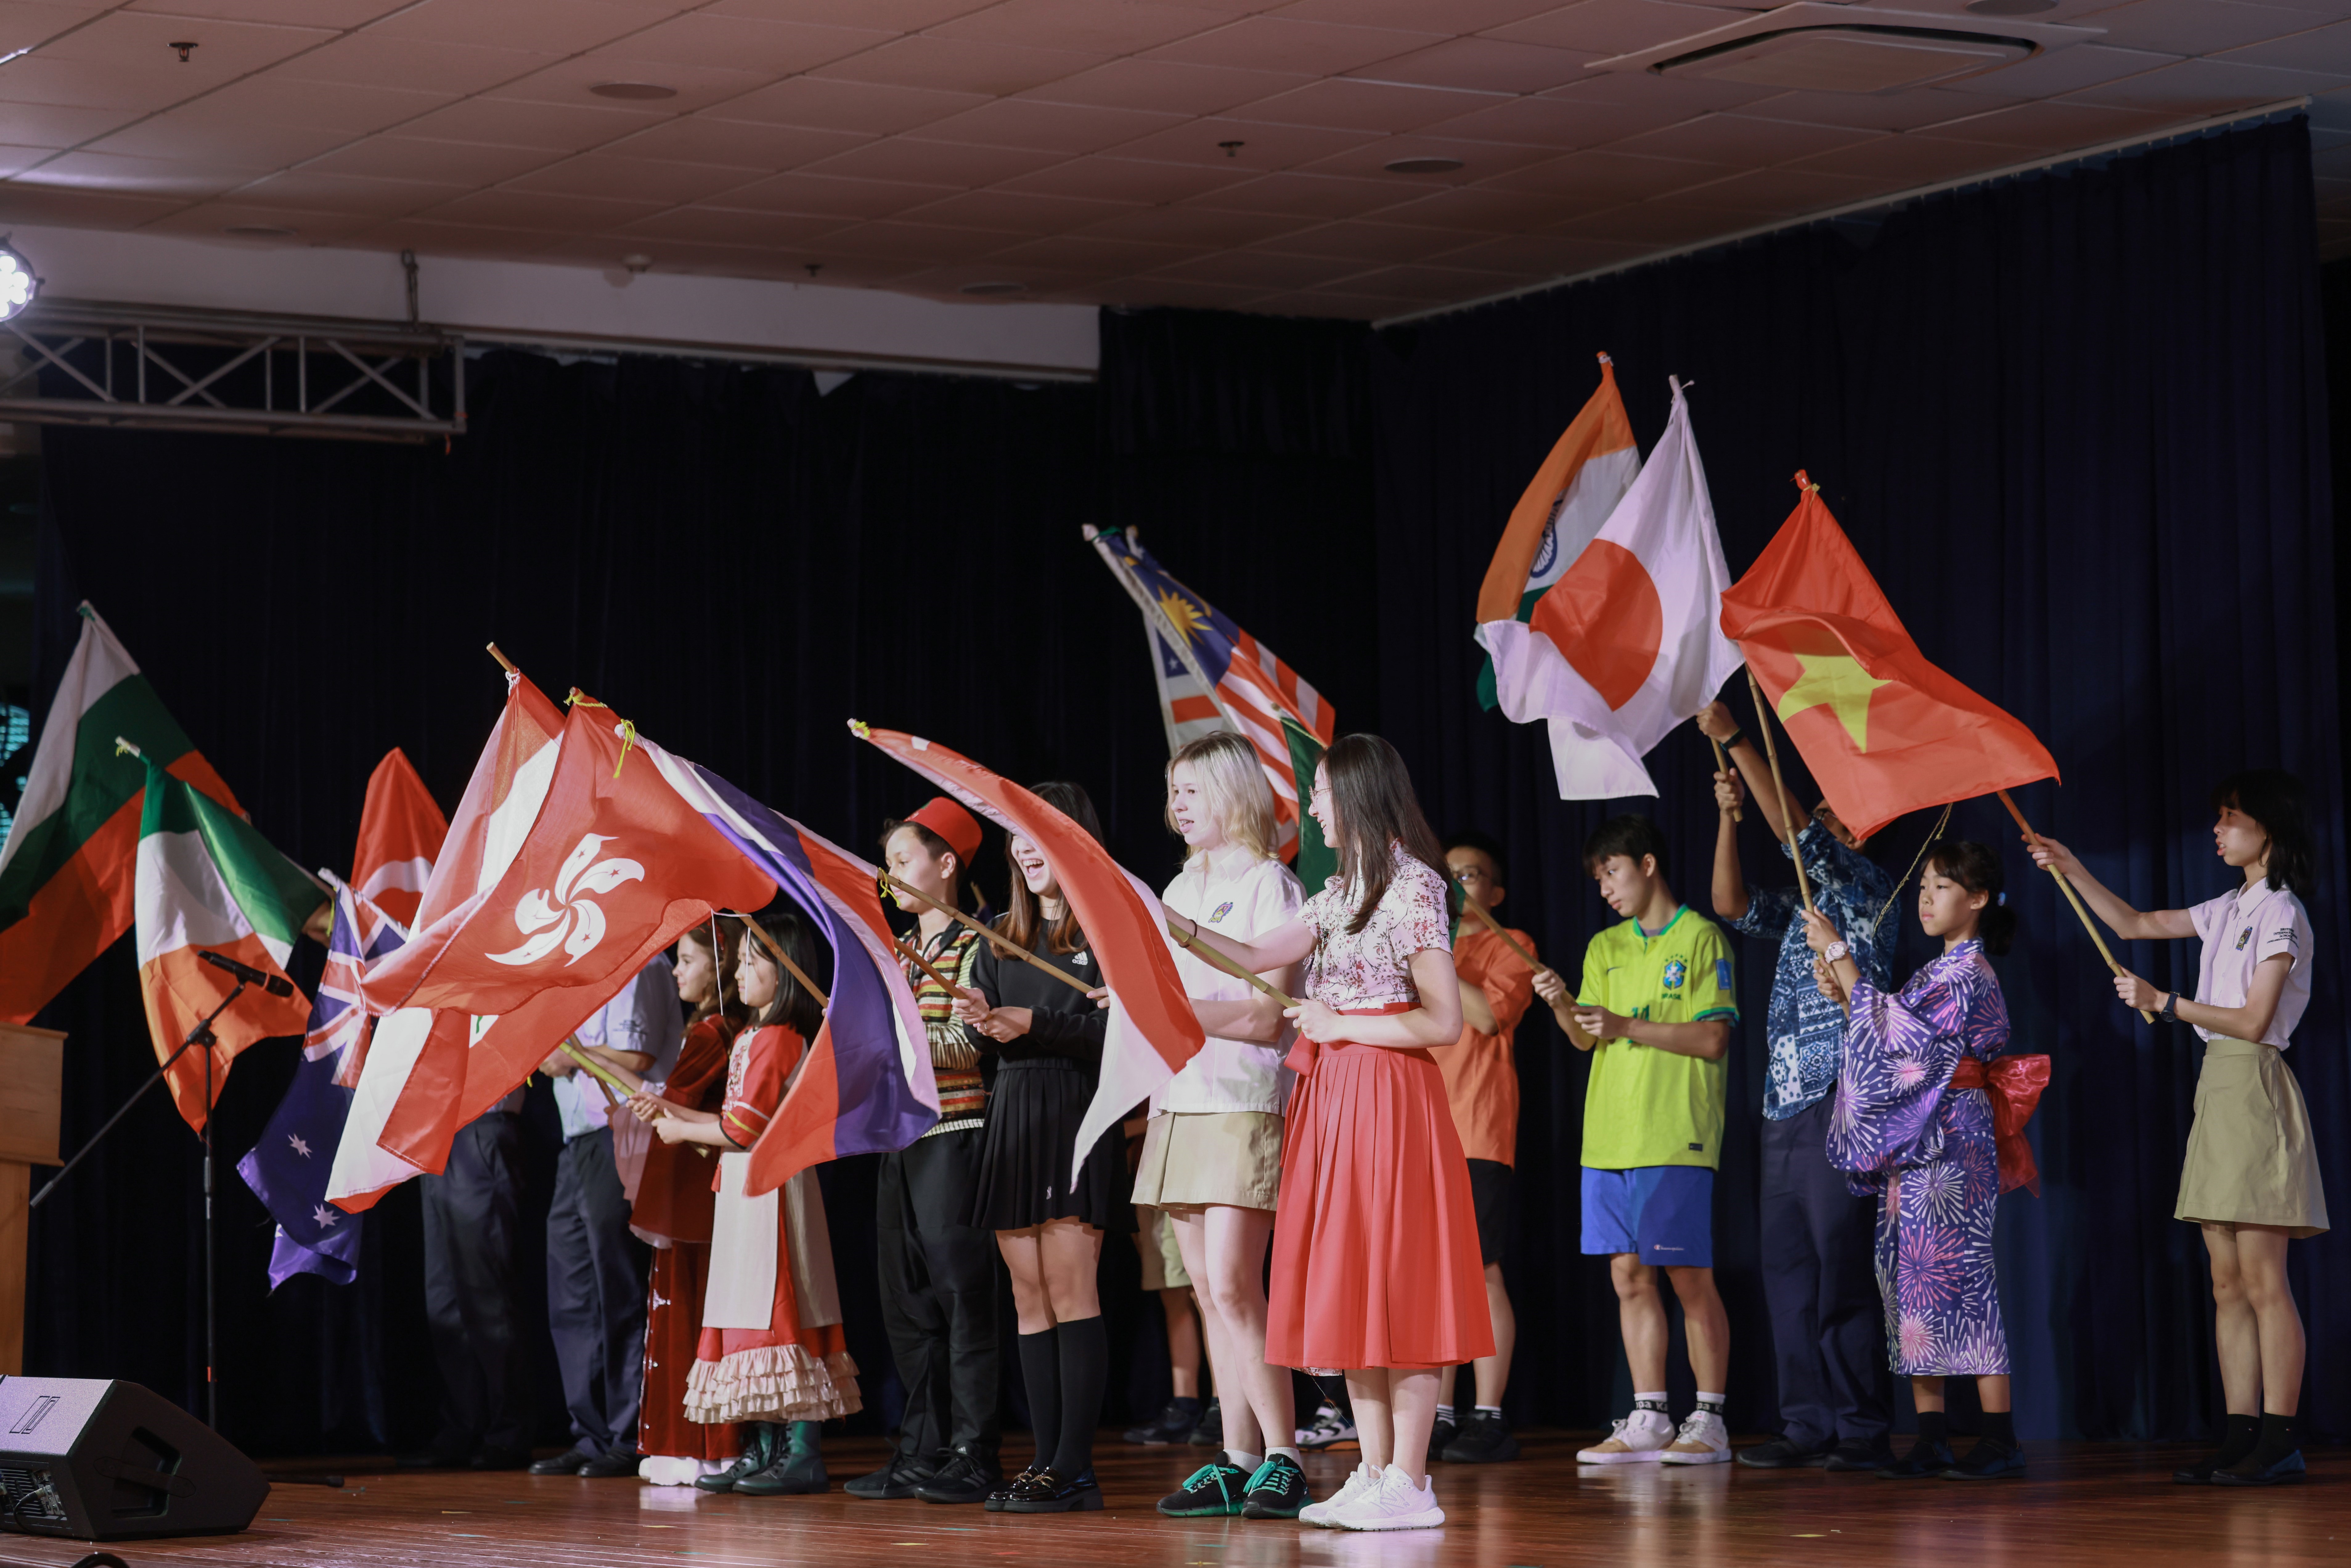 Nord Anglia Education schools in Hanoi promote inclusivity and belonging on World Day of Cultural Diversity